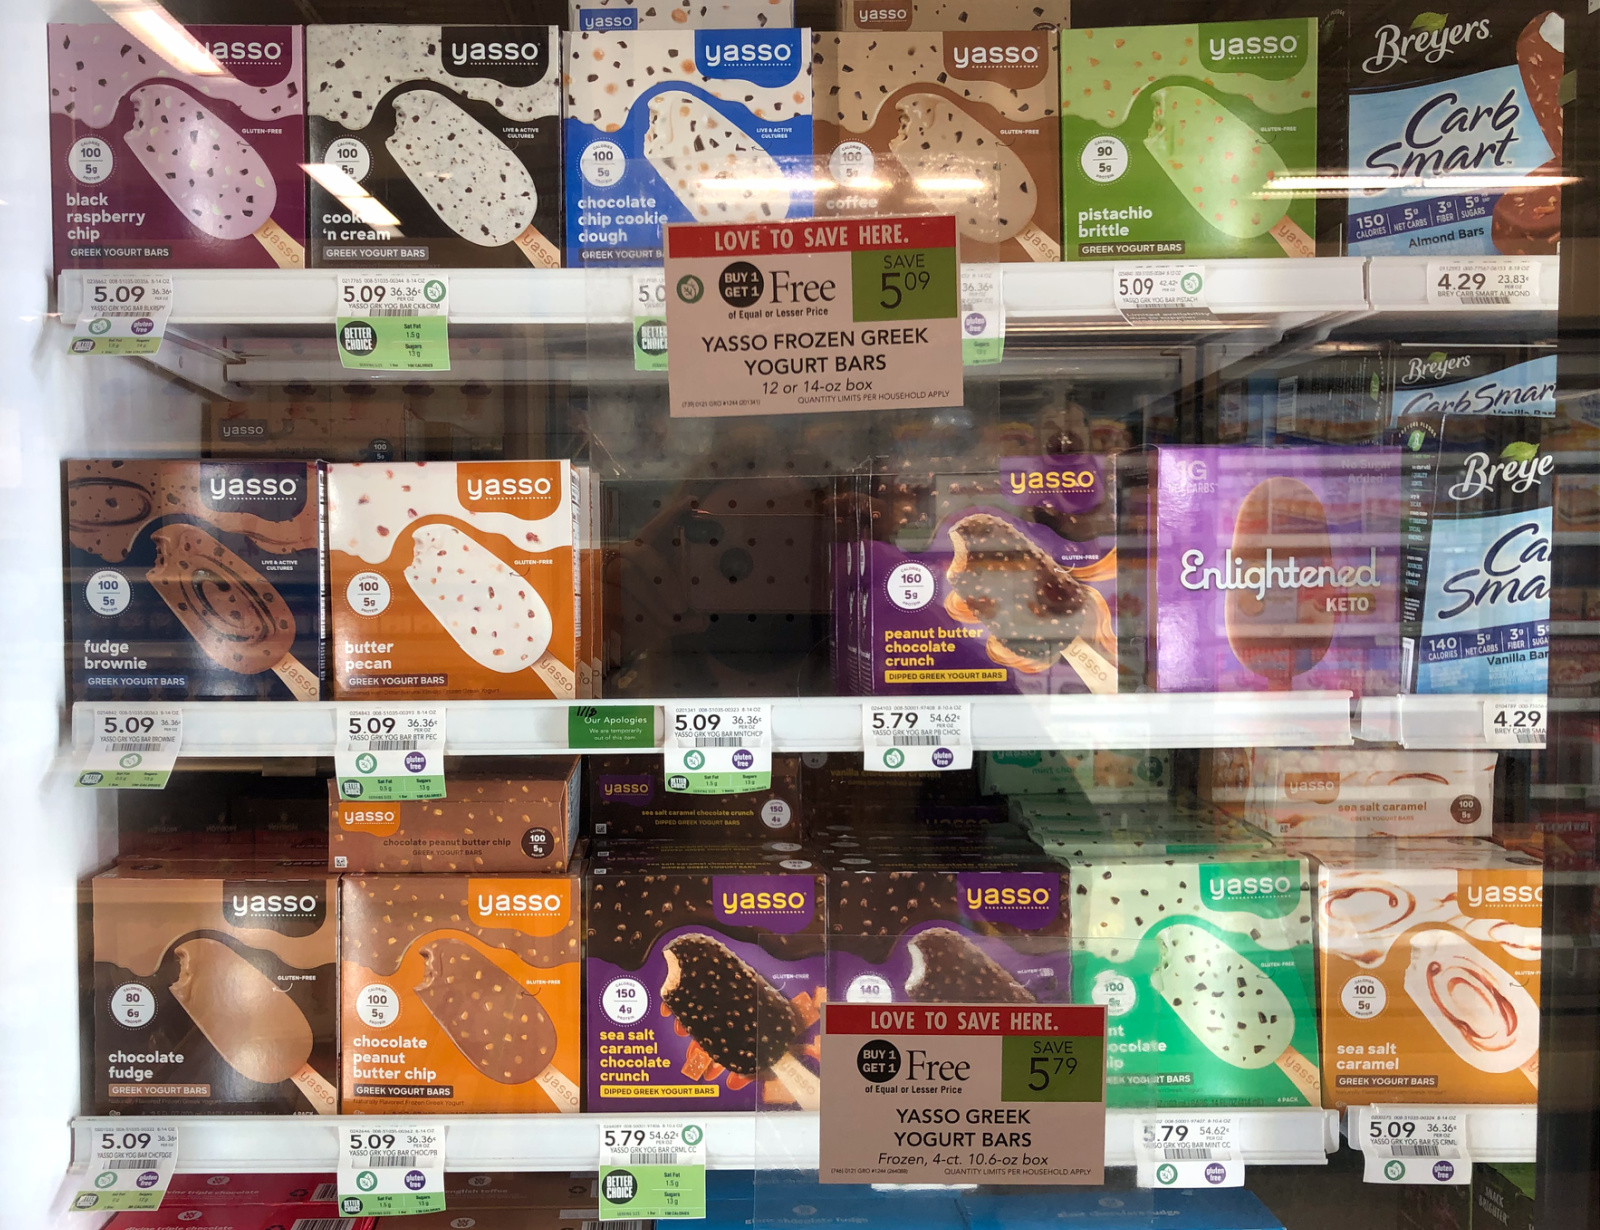 Make Room In The Freezer - All Yasso Products Are BOGO At Publix (Including The Chocolate Dipped Varieties!) on I Heart Publix 2